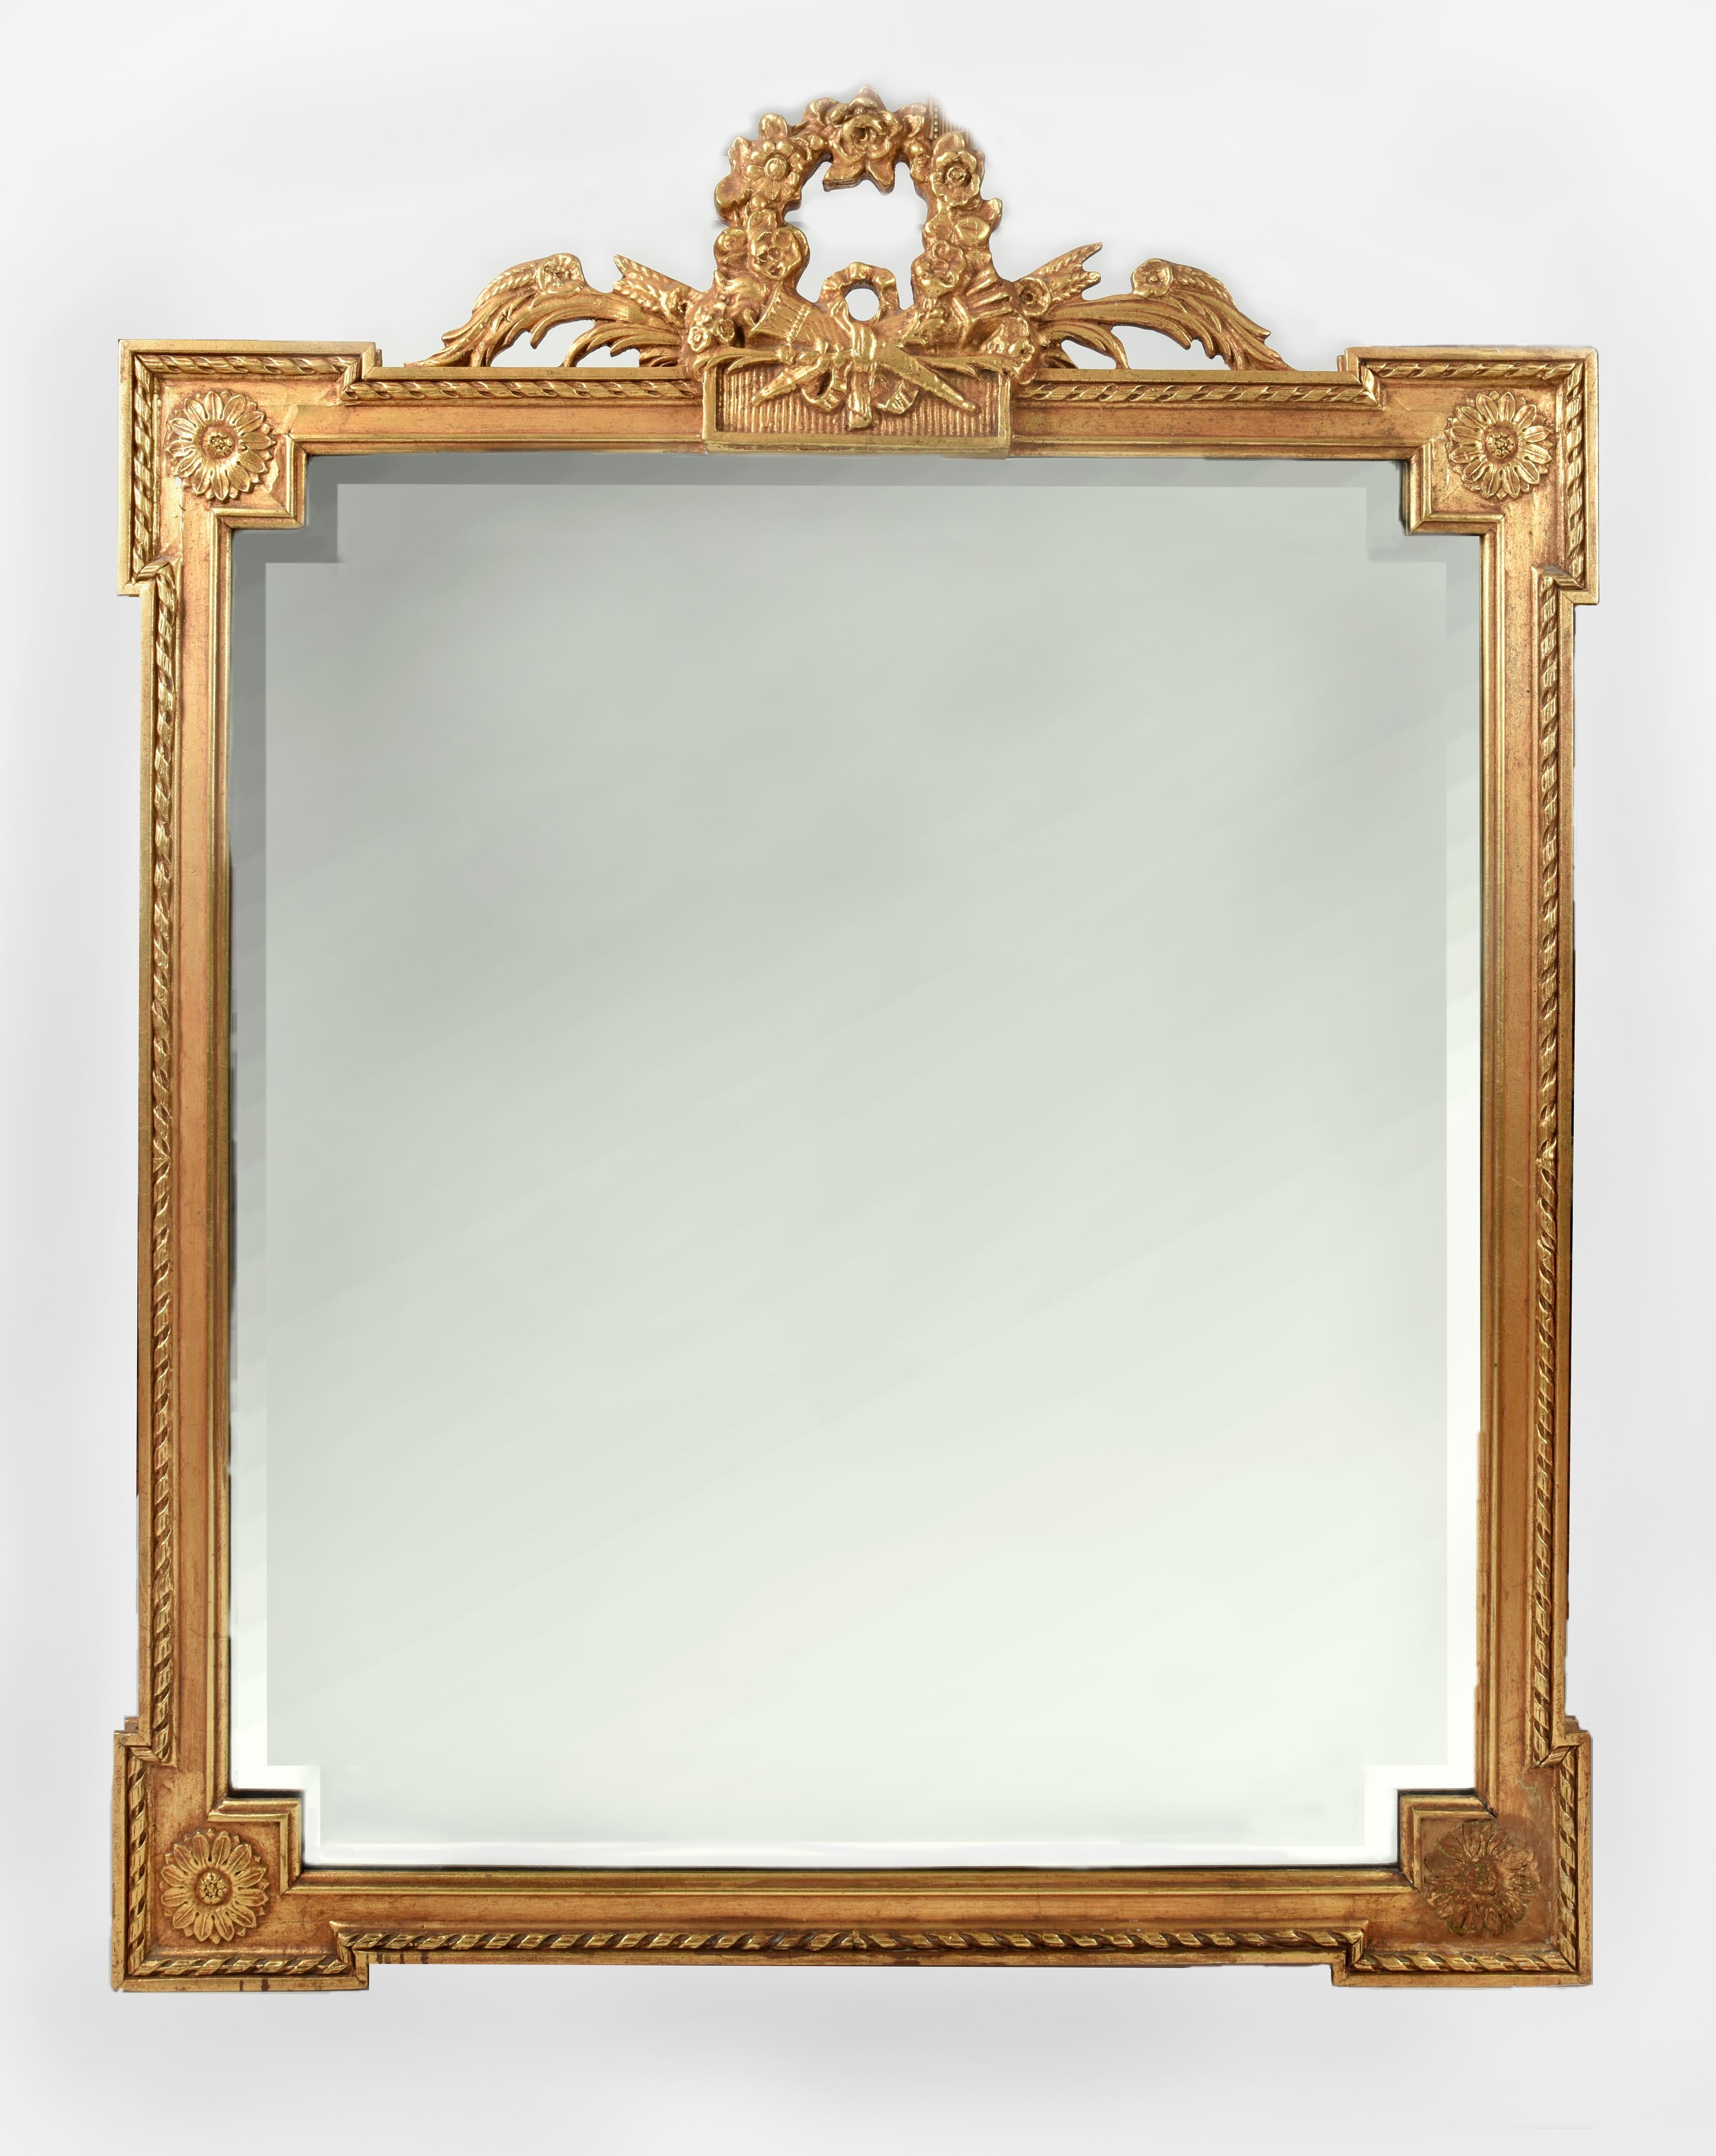 Early 20th century matching pair giltwood frame beveled hanging wall mirrors. These matching pair are just exquisite and in excellent vintage condition. Each mirror is having a beautiful wreath crests top and all around design details. Each one